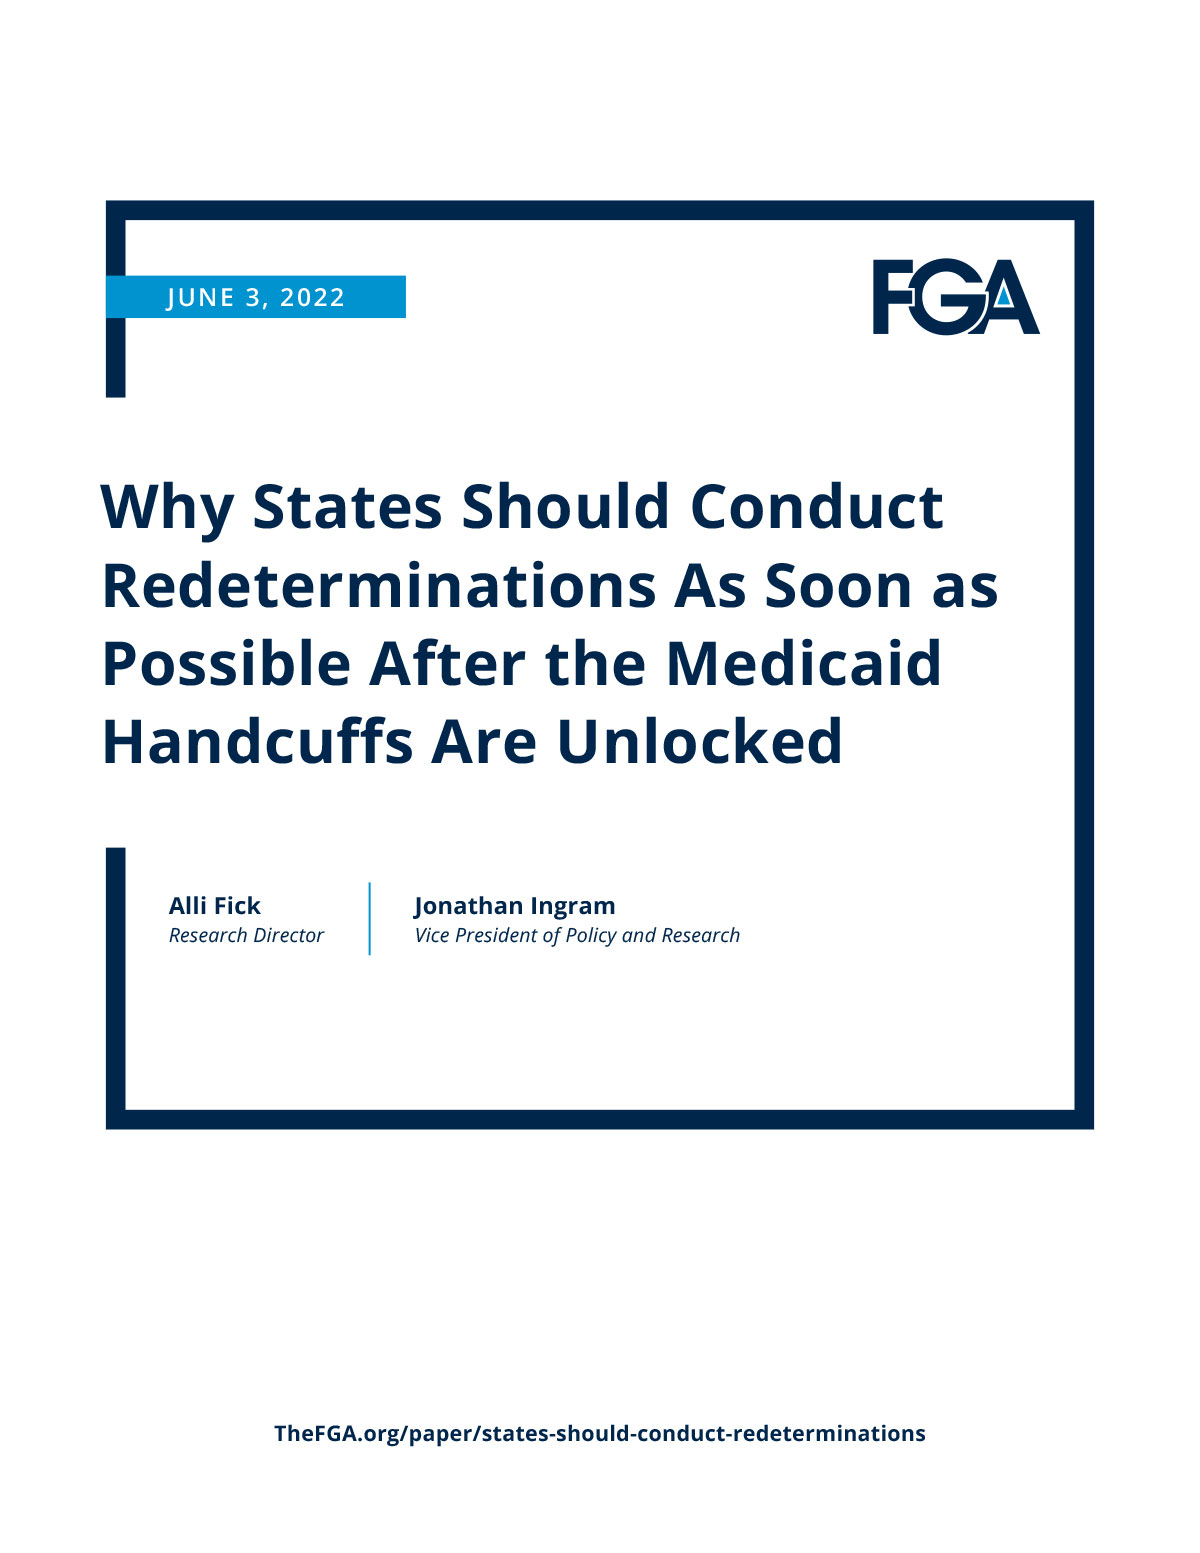 Why States Should Conduct Redeterminations As Soon As Possible After the Medicaid Handcuffs Are Unlocked